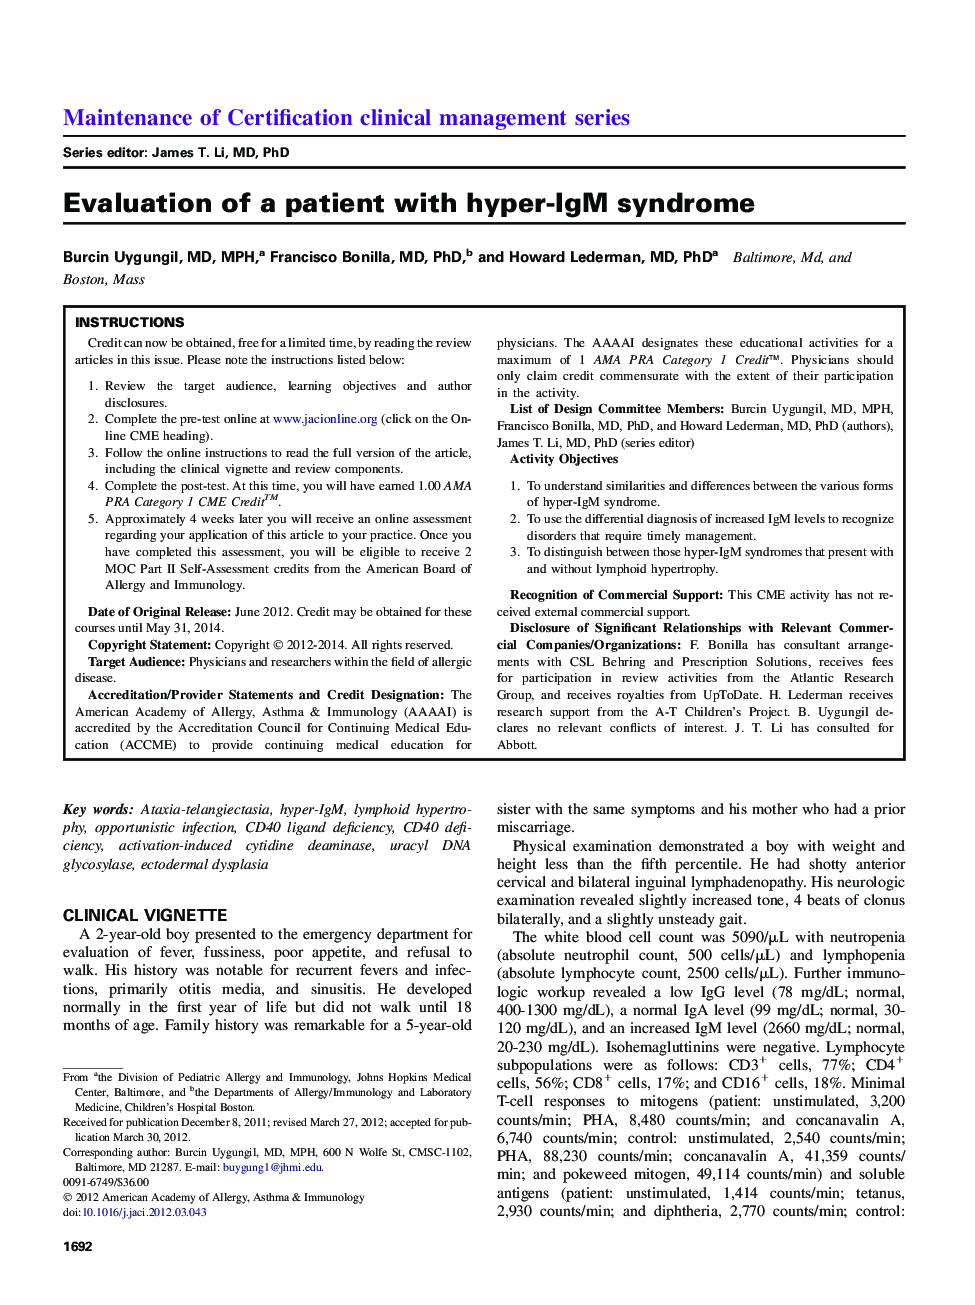 Evaluation of a patient with hyper-IgM syndrome